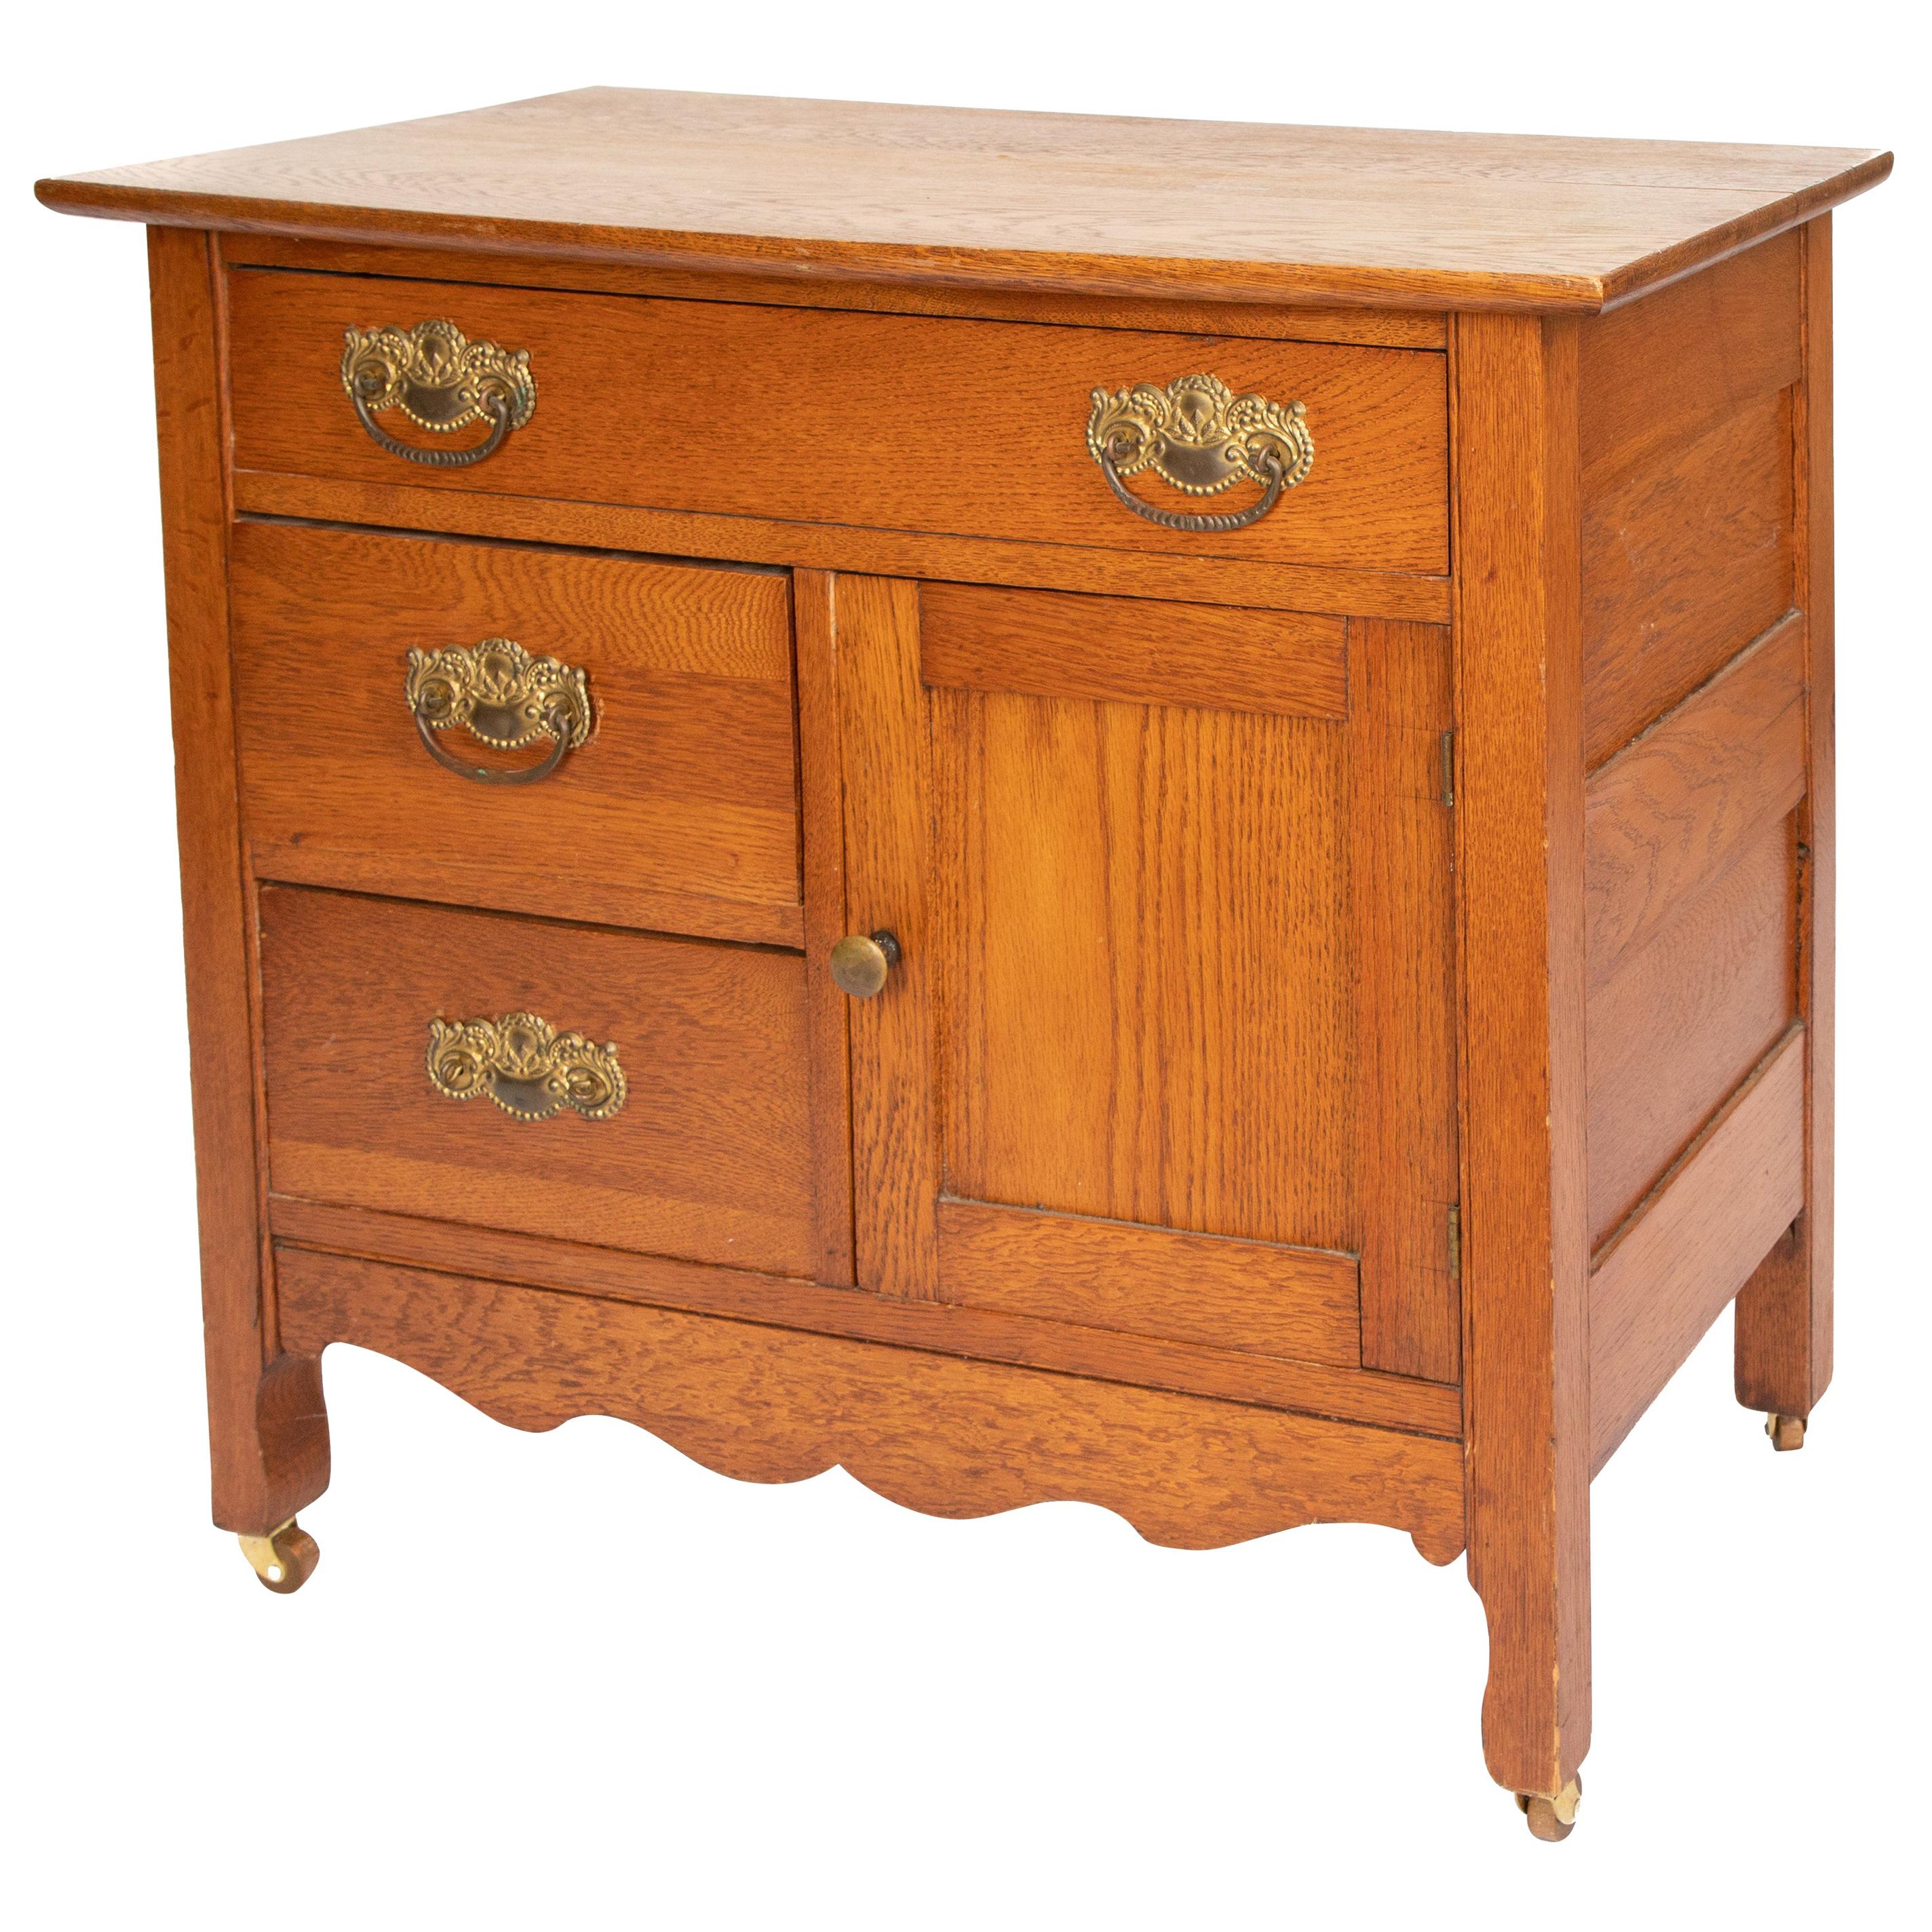 Knostman & Peterson Washstand For Sale